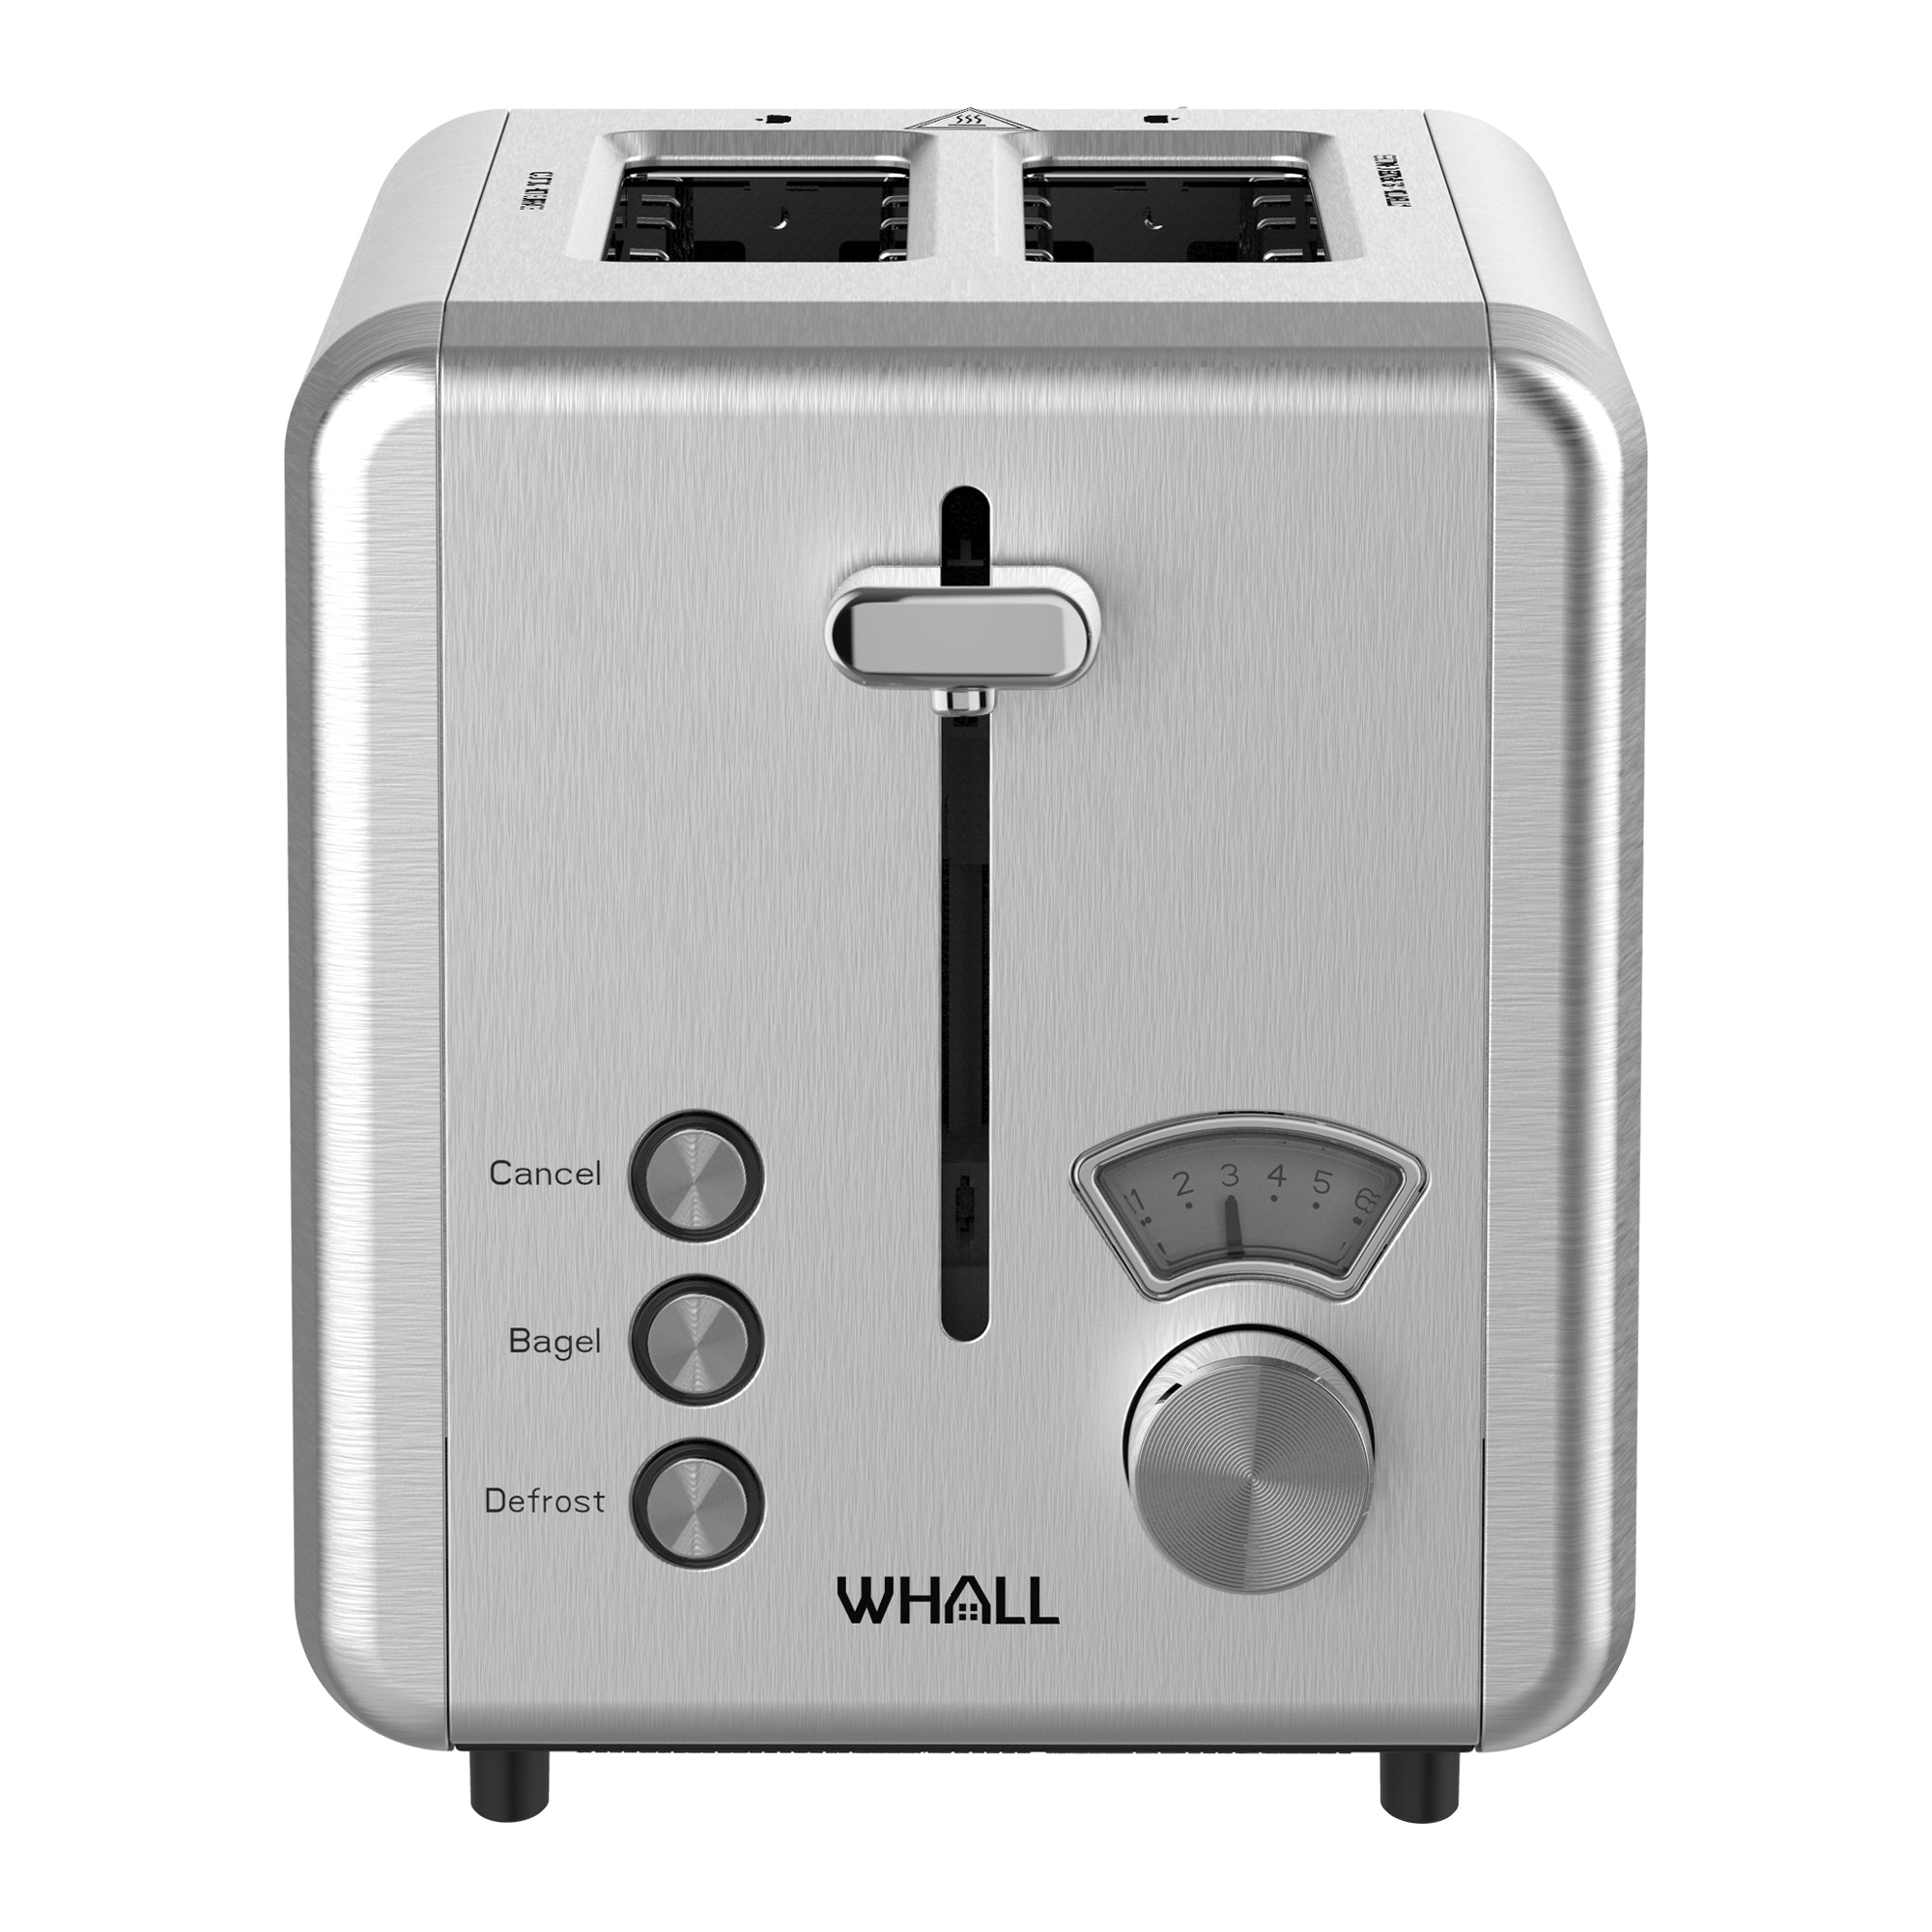 WHALL® Knob Toaster 2 & 4 Slice | Stainless Steel, Digital Timer, Sound | 6 Bread Types & Shades